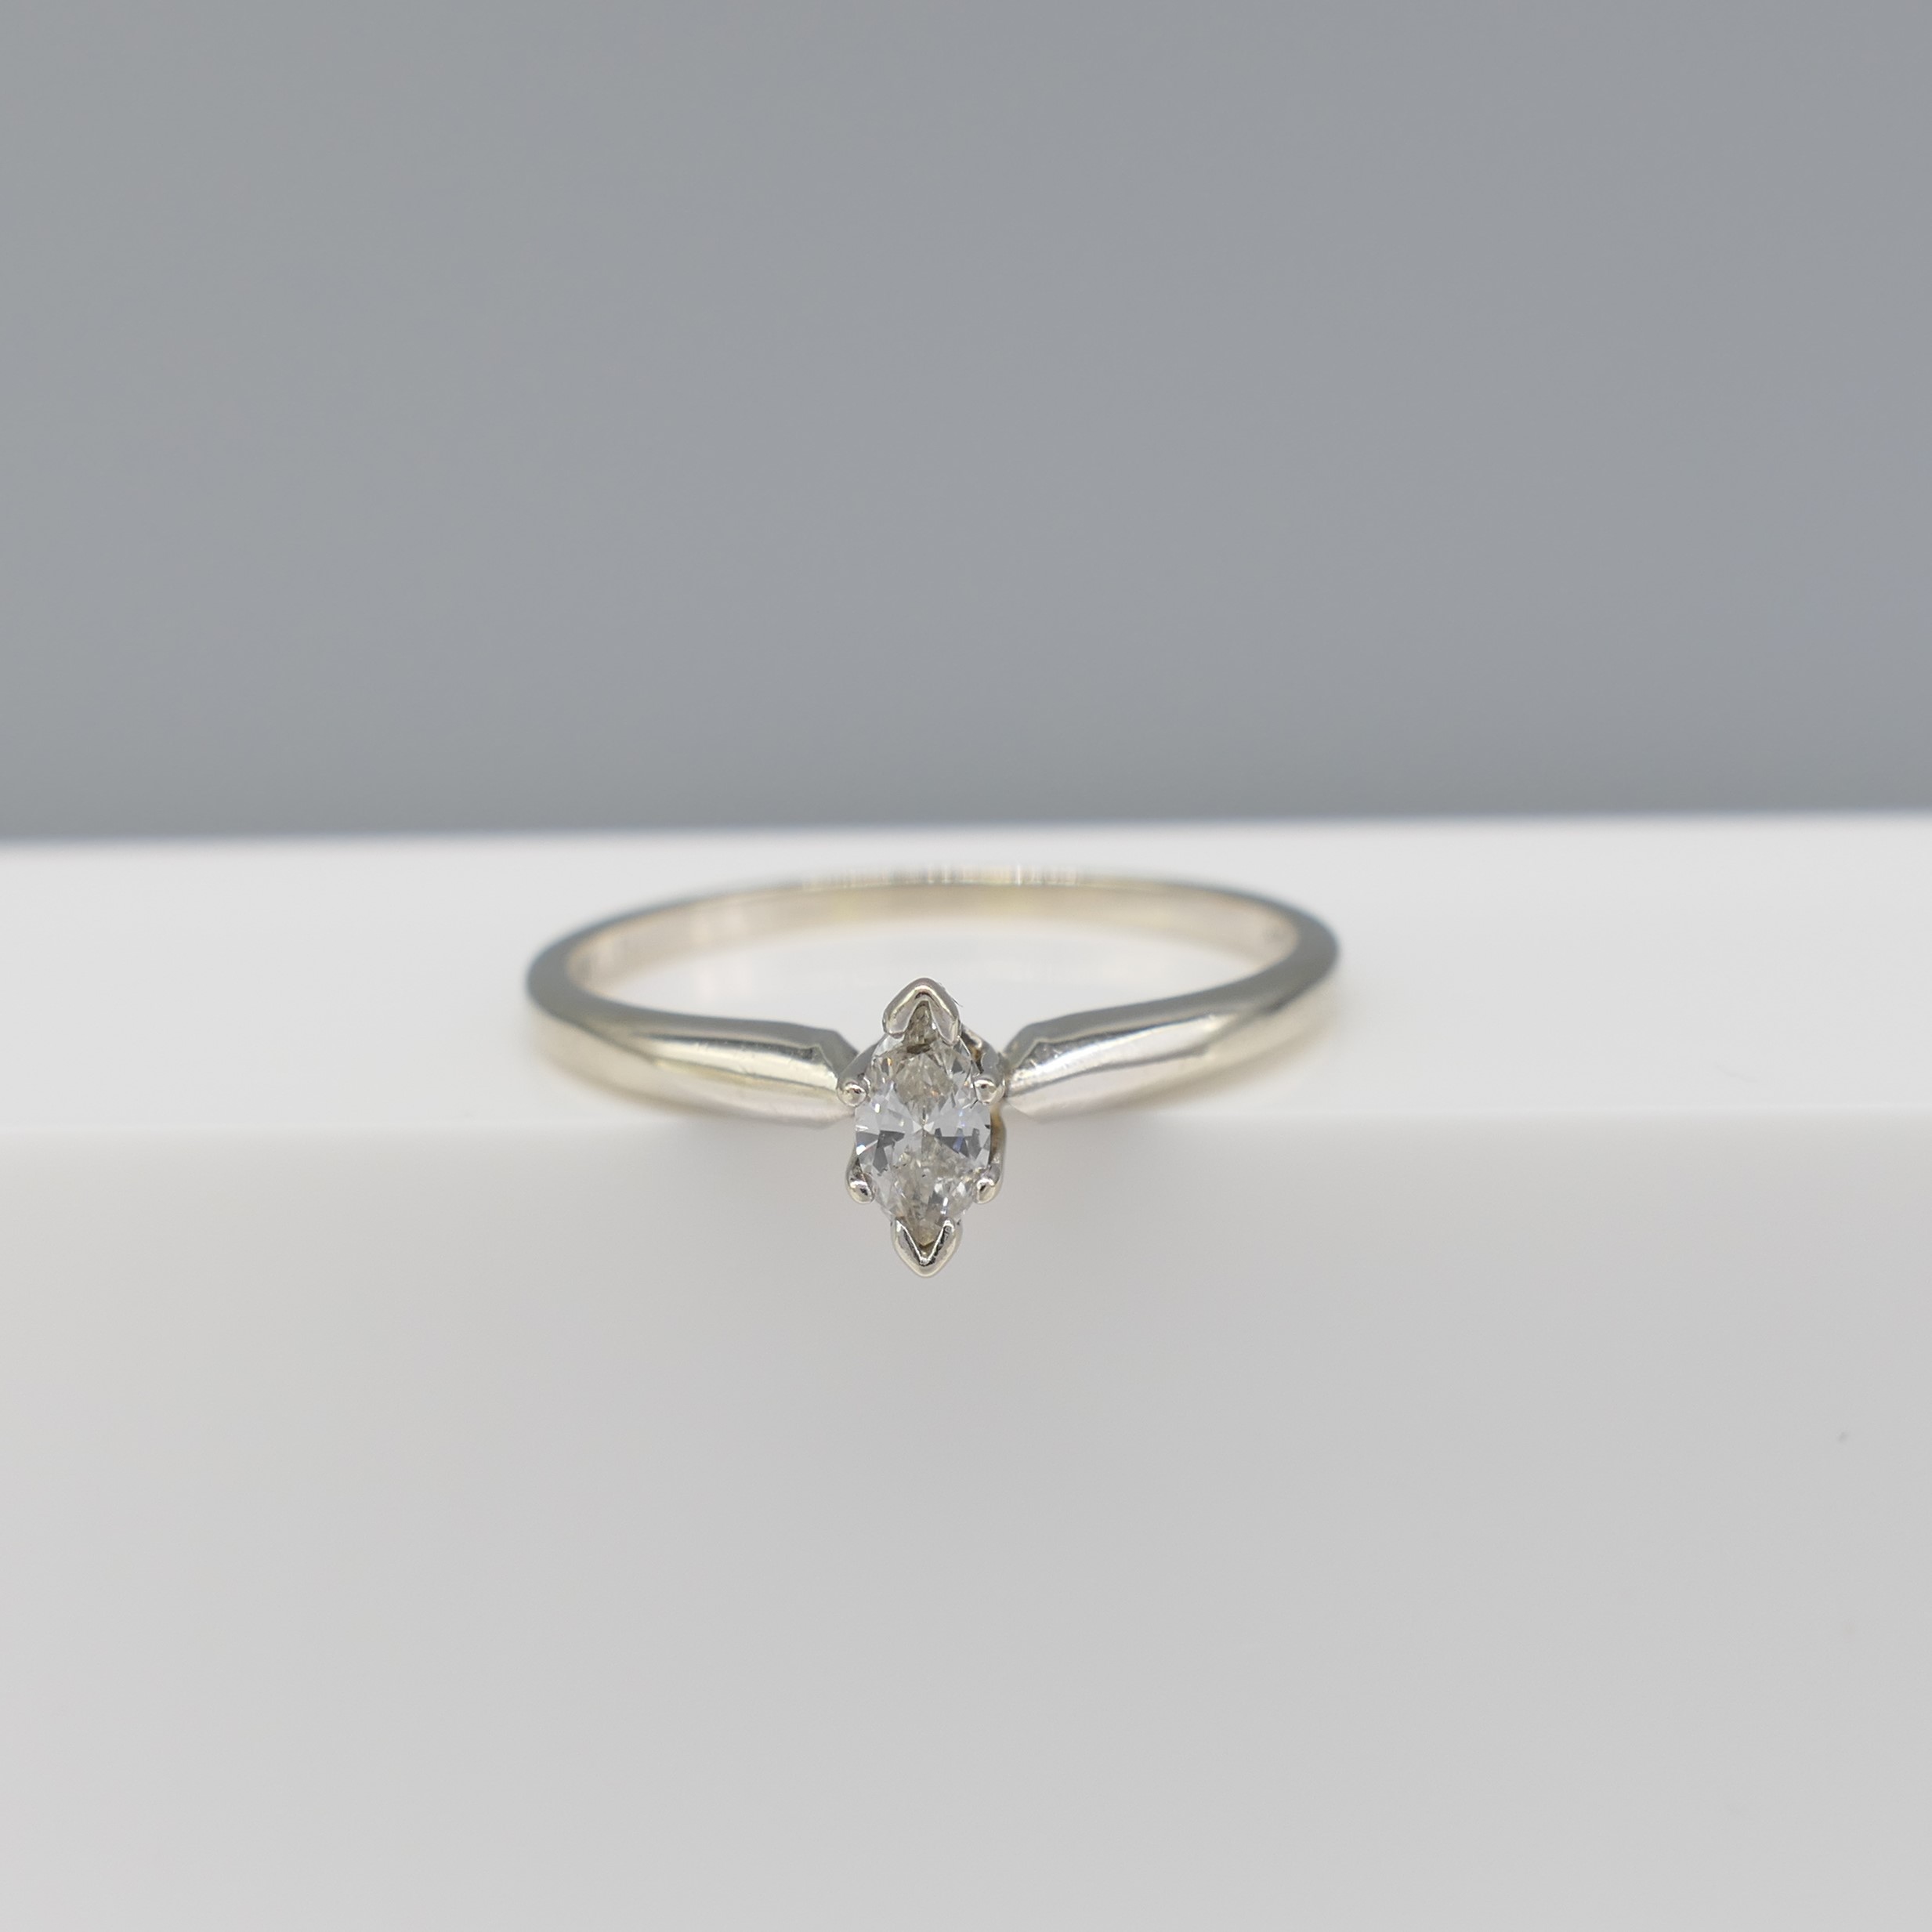 Marquise-cut diamond solitaire ring in 14 carat wh - Image 4 of 6